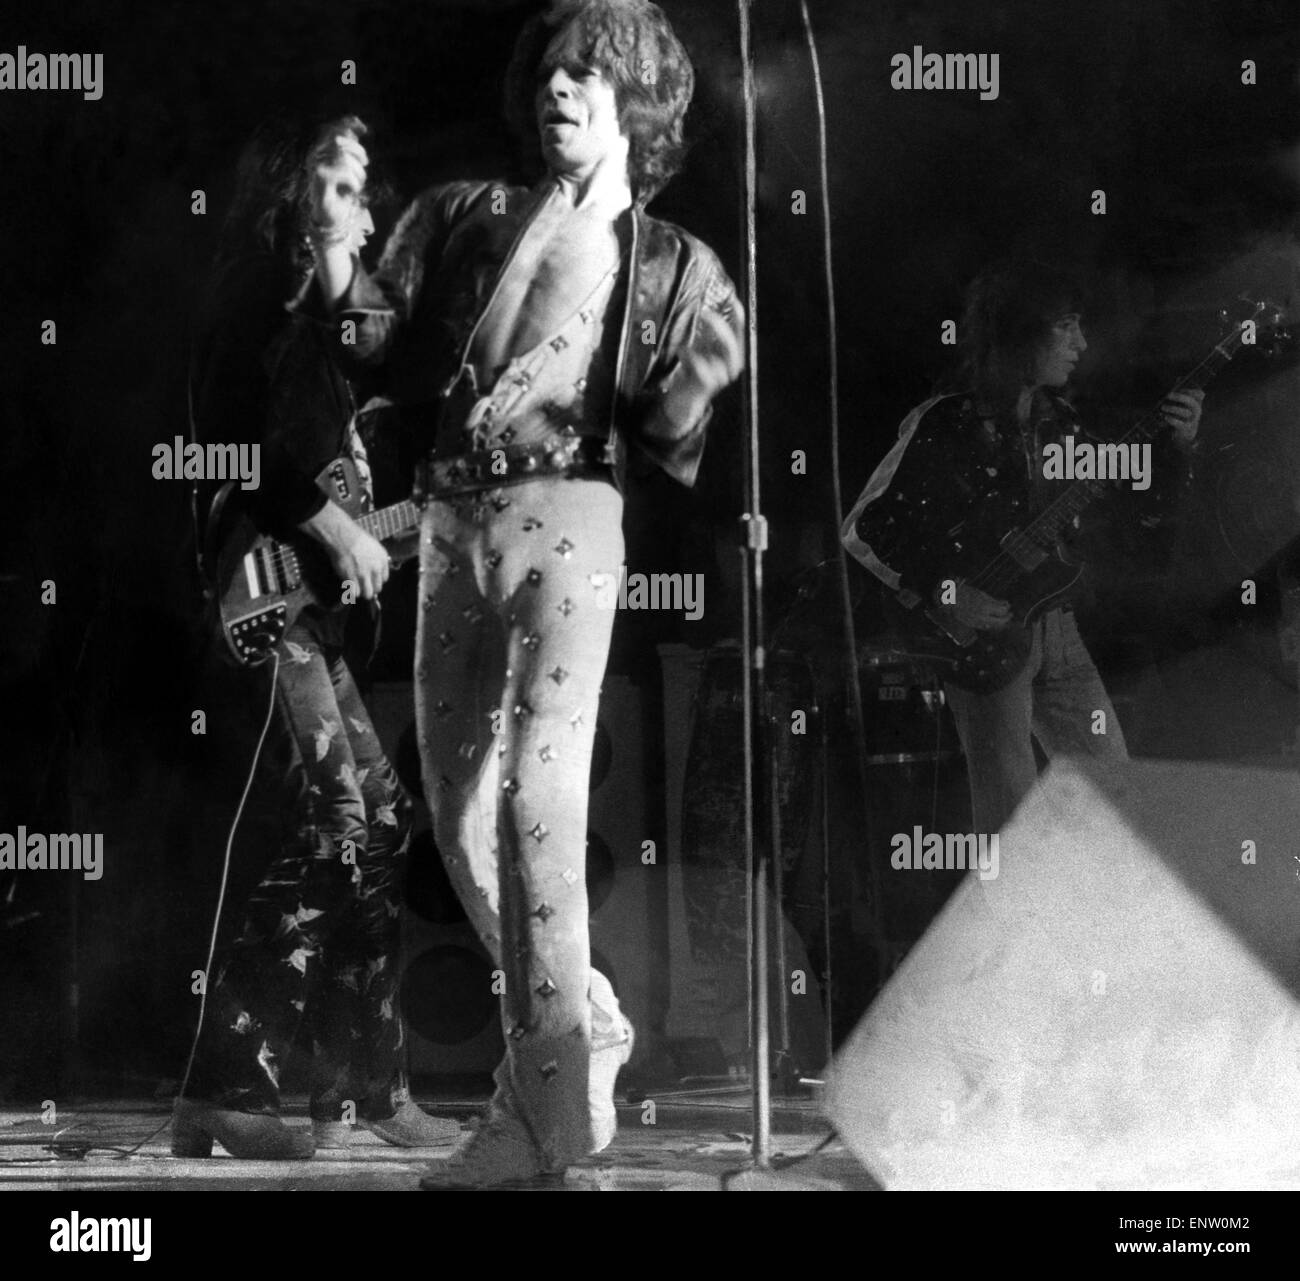 The Rolling Stones European Tour 1973, Mick Jagger on stage at the Kings  Hall, Belle Vue, Manchester, England, 11th September 1973 Stock Photo -  Alamy